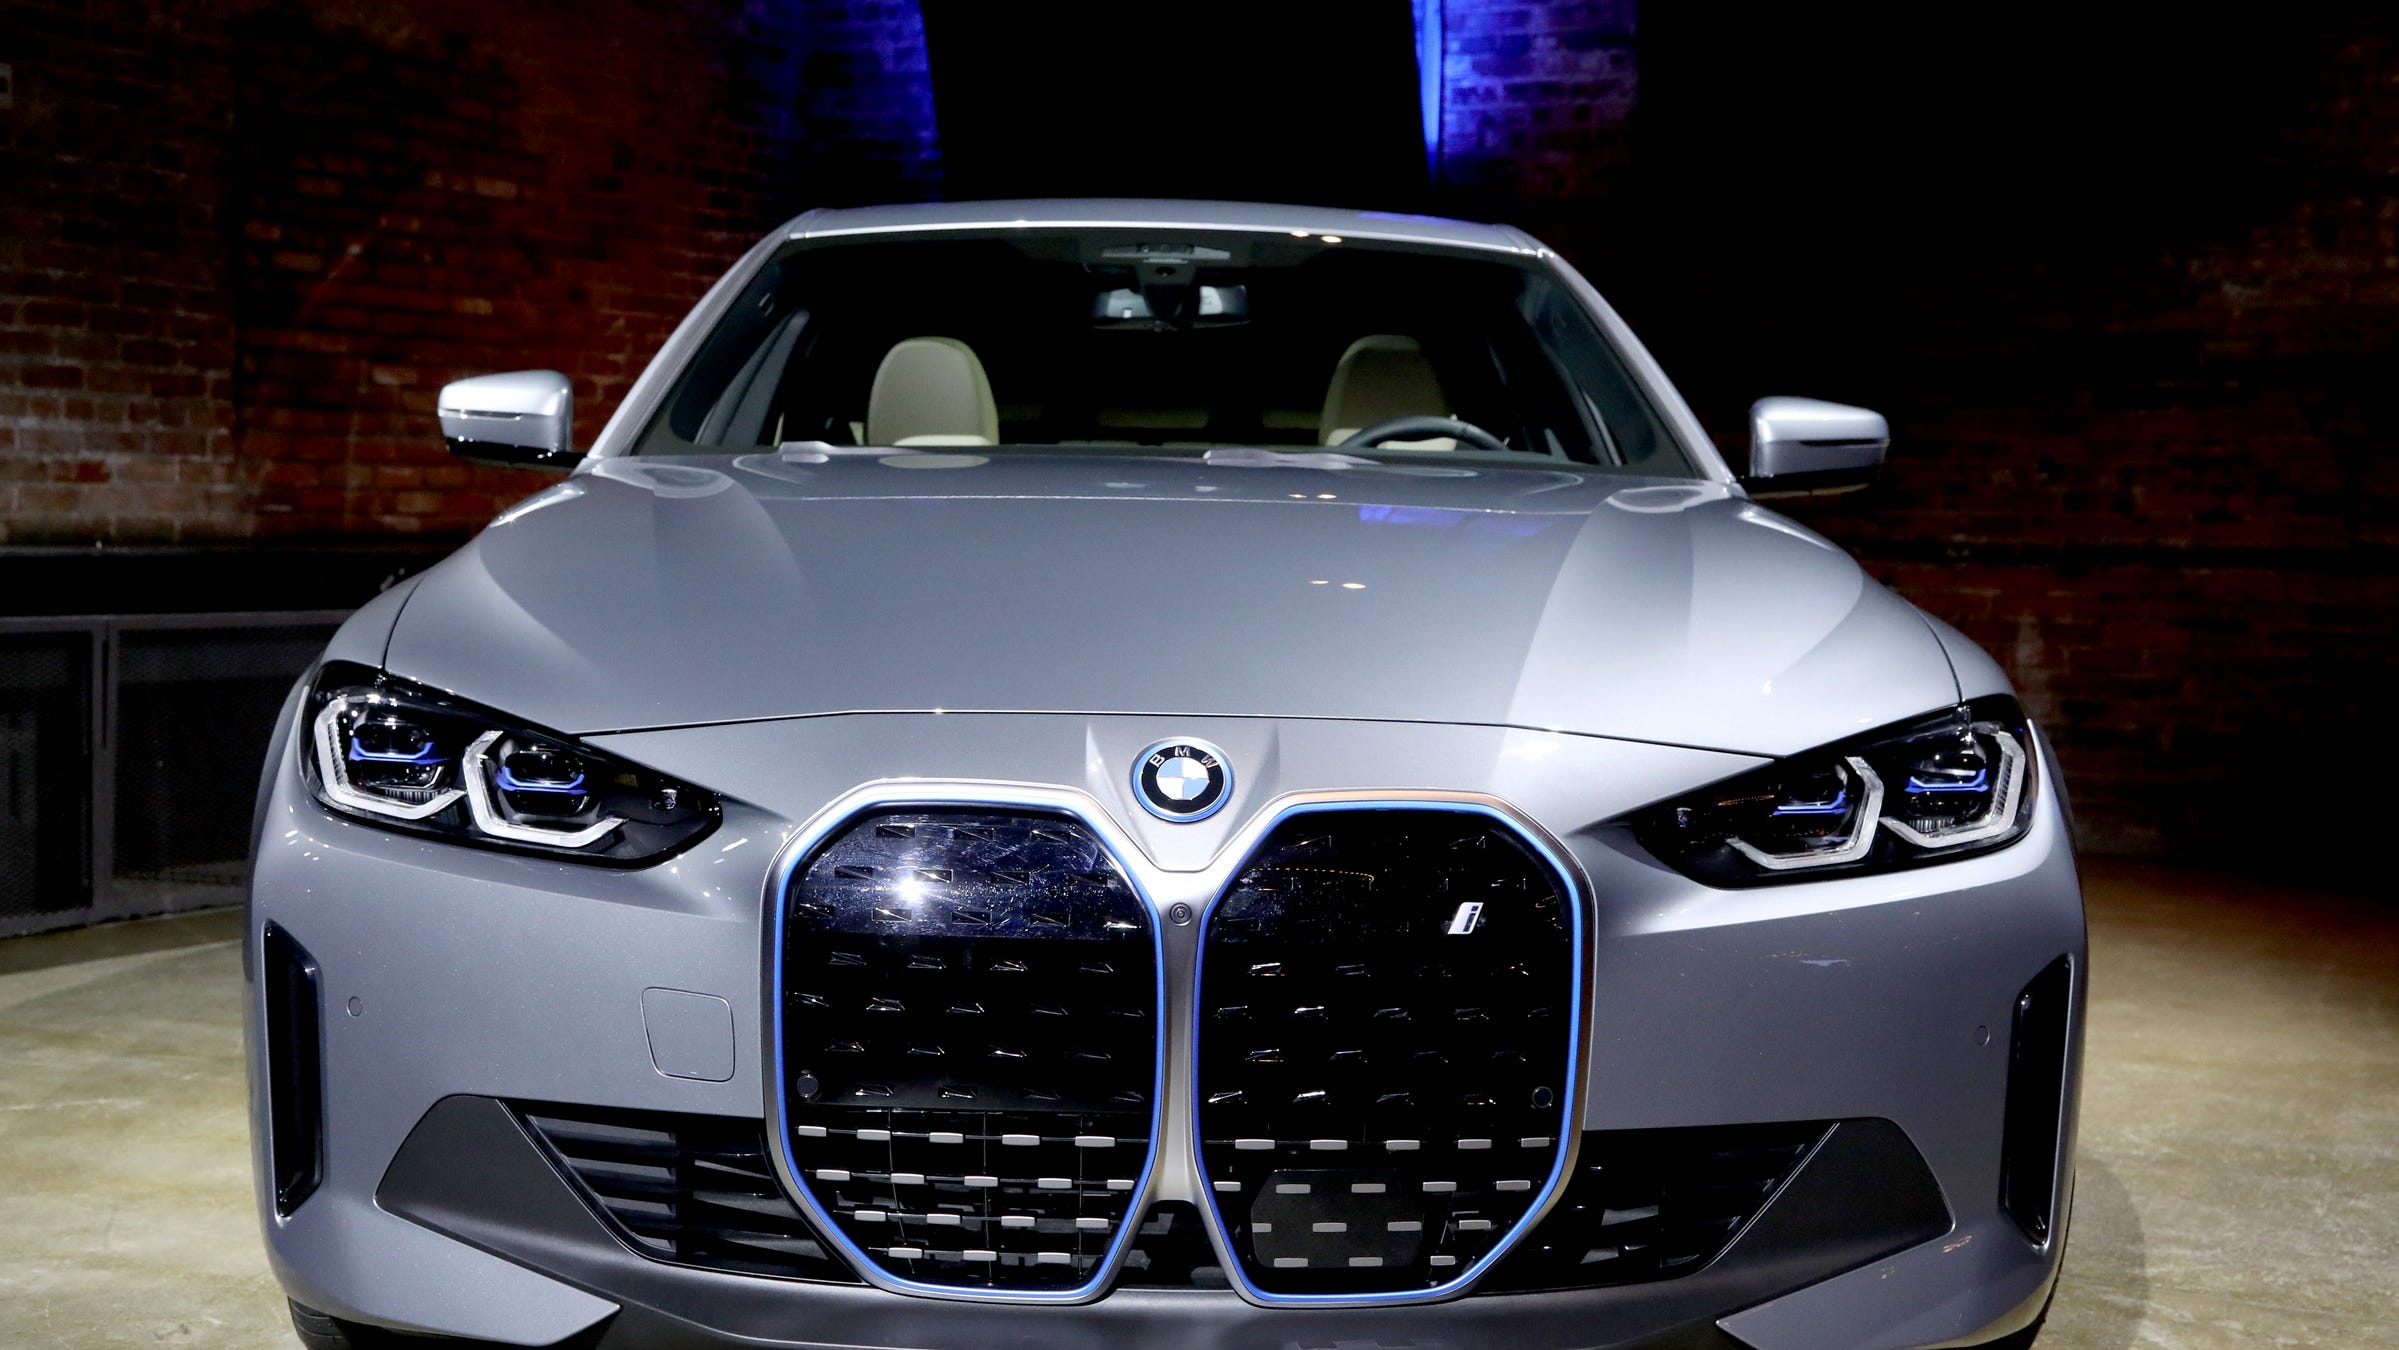 2022 BMW i4 and iX Revealed at Garden Theater in Detroit BMW i4 Forum